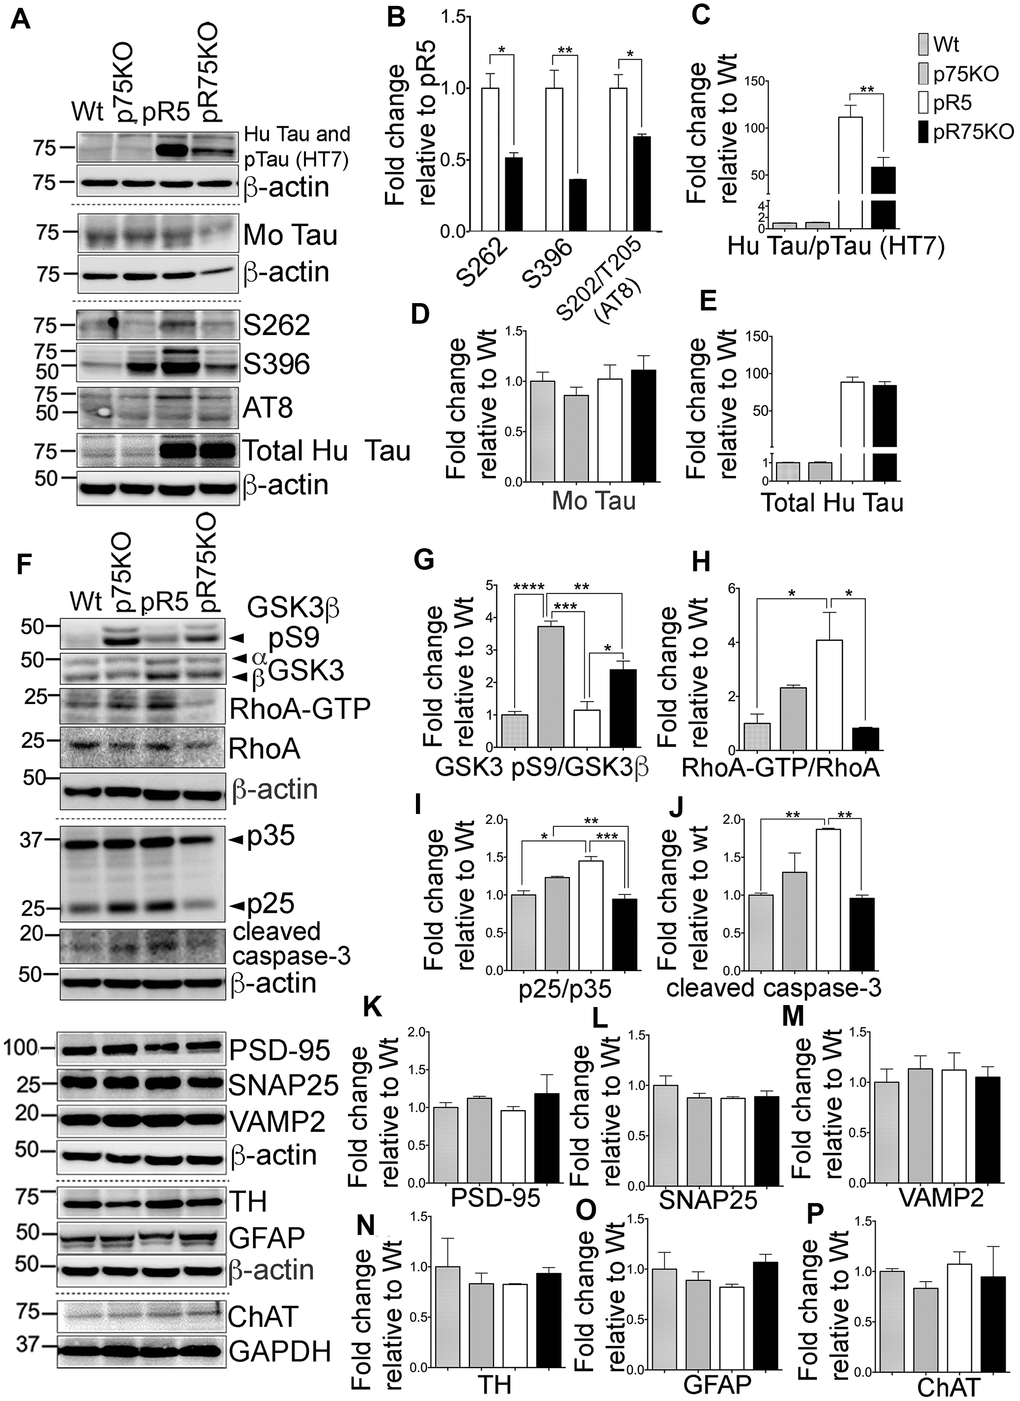 Knock out of p75NTR attenuated Tau hyperposphorylation and the elevated Tau kinases and caspase-3 activities observed in pR5 mice with P301L Tau at 9 months. (A) Protein blots of phosphorylated and non-phosphorylated human Tau in in the forebrain of Wt, p75KO, pR5, and pR75KO mice. (B) Protein band intensity quantification of phosphorylated human Tau at sites S262, S396 and S202/T205 (AT8) normalised to the total human Tau and expressed as fold change relative to pR5. Protein band intensity quantification of total human Tau and pTau detected by HT7 (C), total mouse Tau detected by Tau5 (D), and total human Tau detected by sheep-anti human Tau (E) normalised to β-actin and expressed as fold change relative to Wt. (F) Protein blots of kinases involved in Tau phosphorylation, GSK3, RhoA and Cdk5-activators, p25 and p35 proteins in the forebrain of Wt, p75KO, pR5, and pR75KO mice; of cleaved caspase-3; and of post-synaptic protein, PSD-95 and pre-synaptic proteins, SNAP25 and VAMP2, GFAP, TH ChAT. Protein band intensity quantification of inactive GSK3: GSK3β pS9 normalised with total GSK3β (G), active RhoA-GTP normalised with total RhoA (H), and Cdk5 activators, p25/p35 ratio (I). All band intensities showing (G–I) are expressed as fold change relative to Wt. Protein band intensity quantification of cleaved caspase-3 levels (J), PSD-95 (K), SNAP25 (L), VAMP2 (M), TH (N), GFAP (O), ChAT (P) normalized with their respective β-actin and expressed as fold change relative to Wt. Data are represented as the mean ± SEM, n=3. Statistical comparisons were performed using one-way ANOVA and Tukey’s test. For human pTau, two-tailed unpaired t-test was used to compare pR5 and pR75KO mice Statistical significance: *P, ***P.